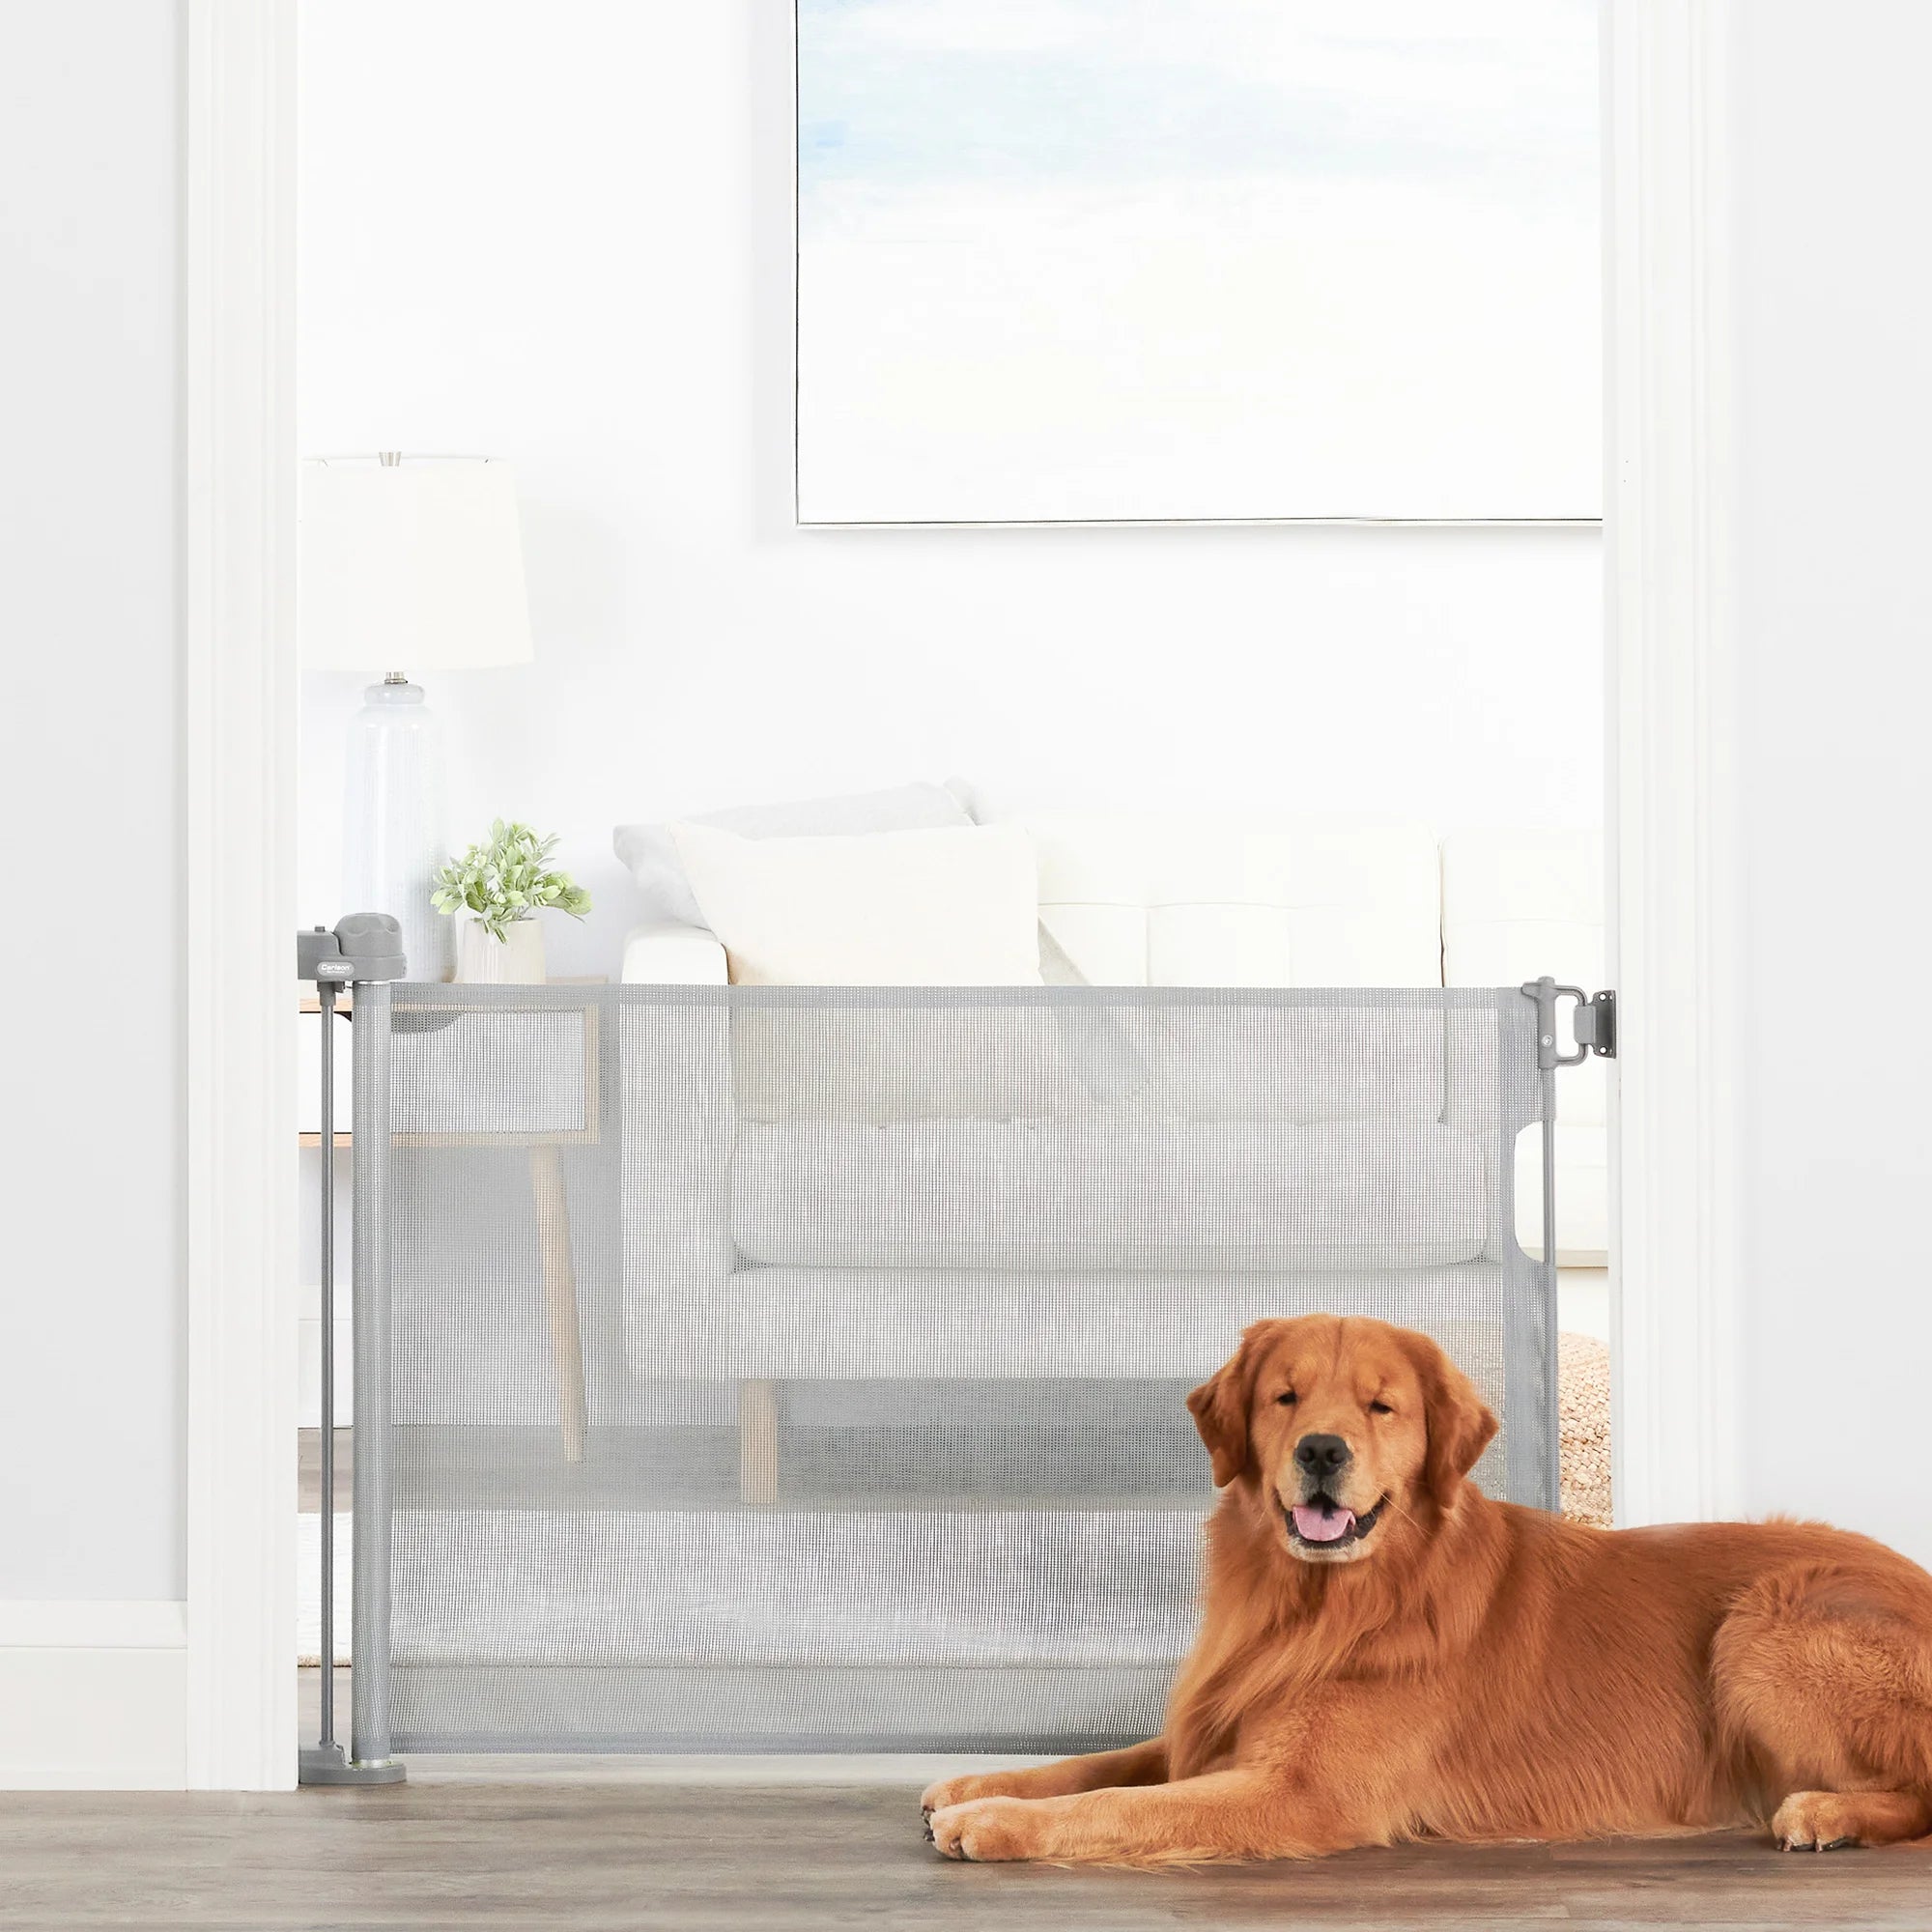 Dog in a living room sitting in front of the Retractable Pet Gate.